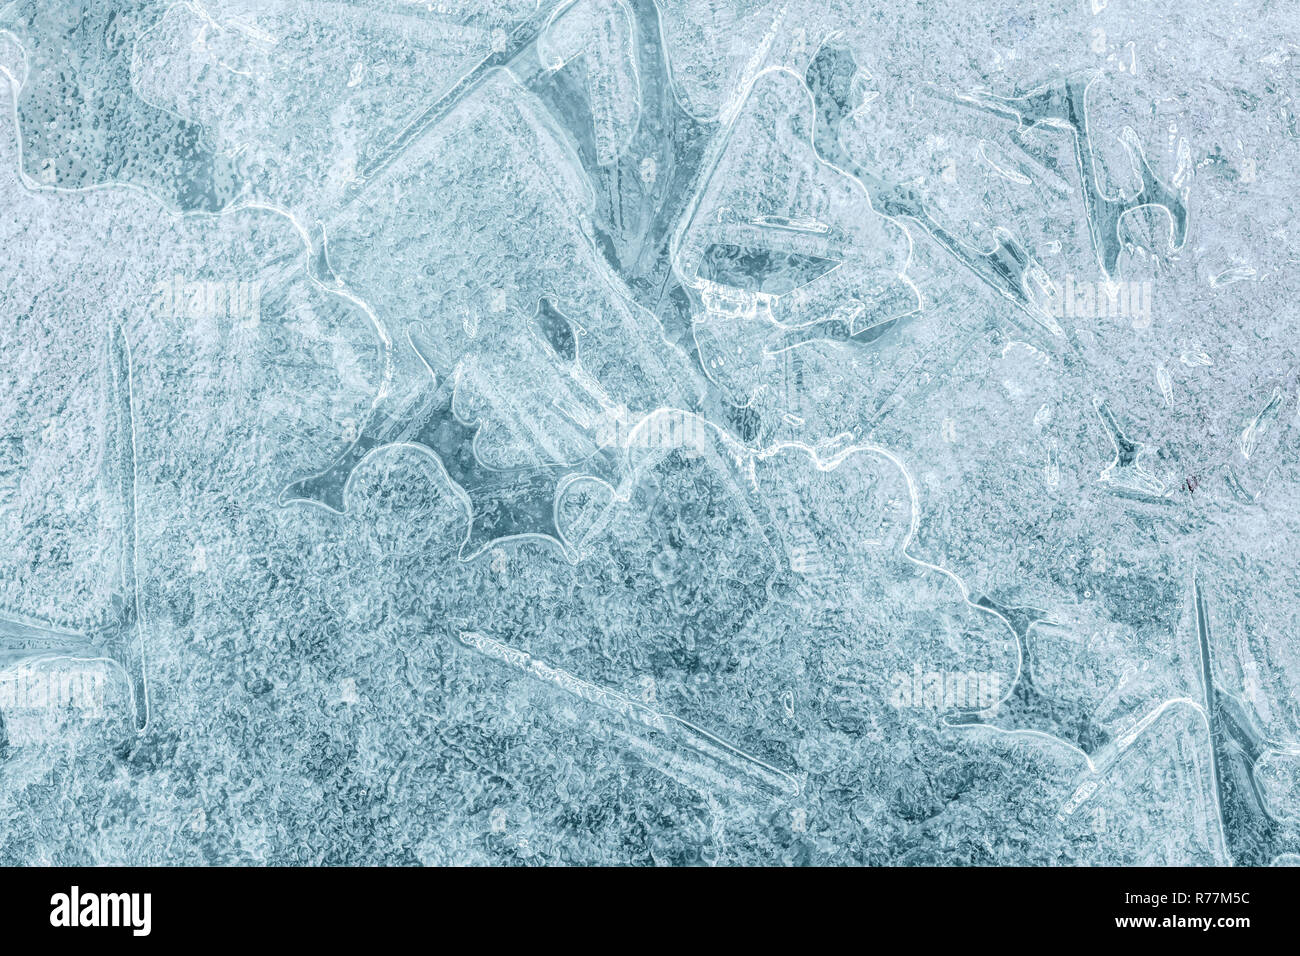 Natural frosty background. ice crystal block with cracks and patterns, textured backdrop Stock Photo